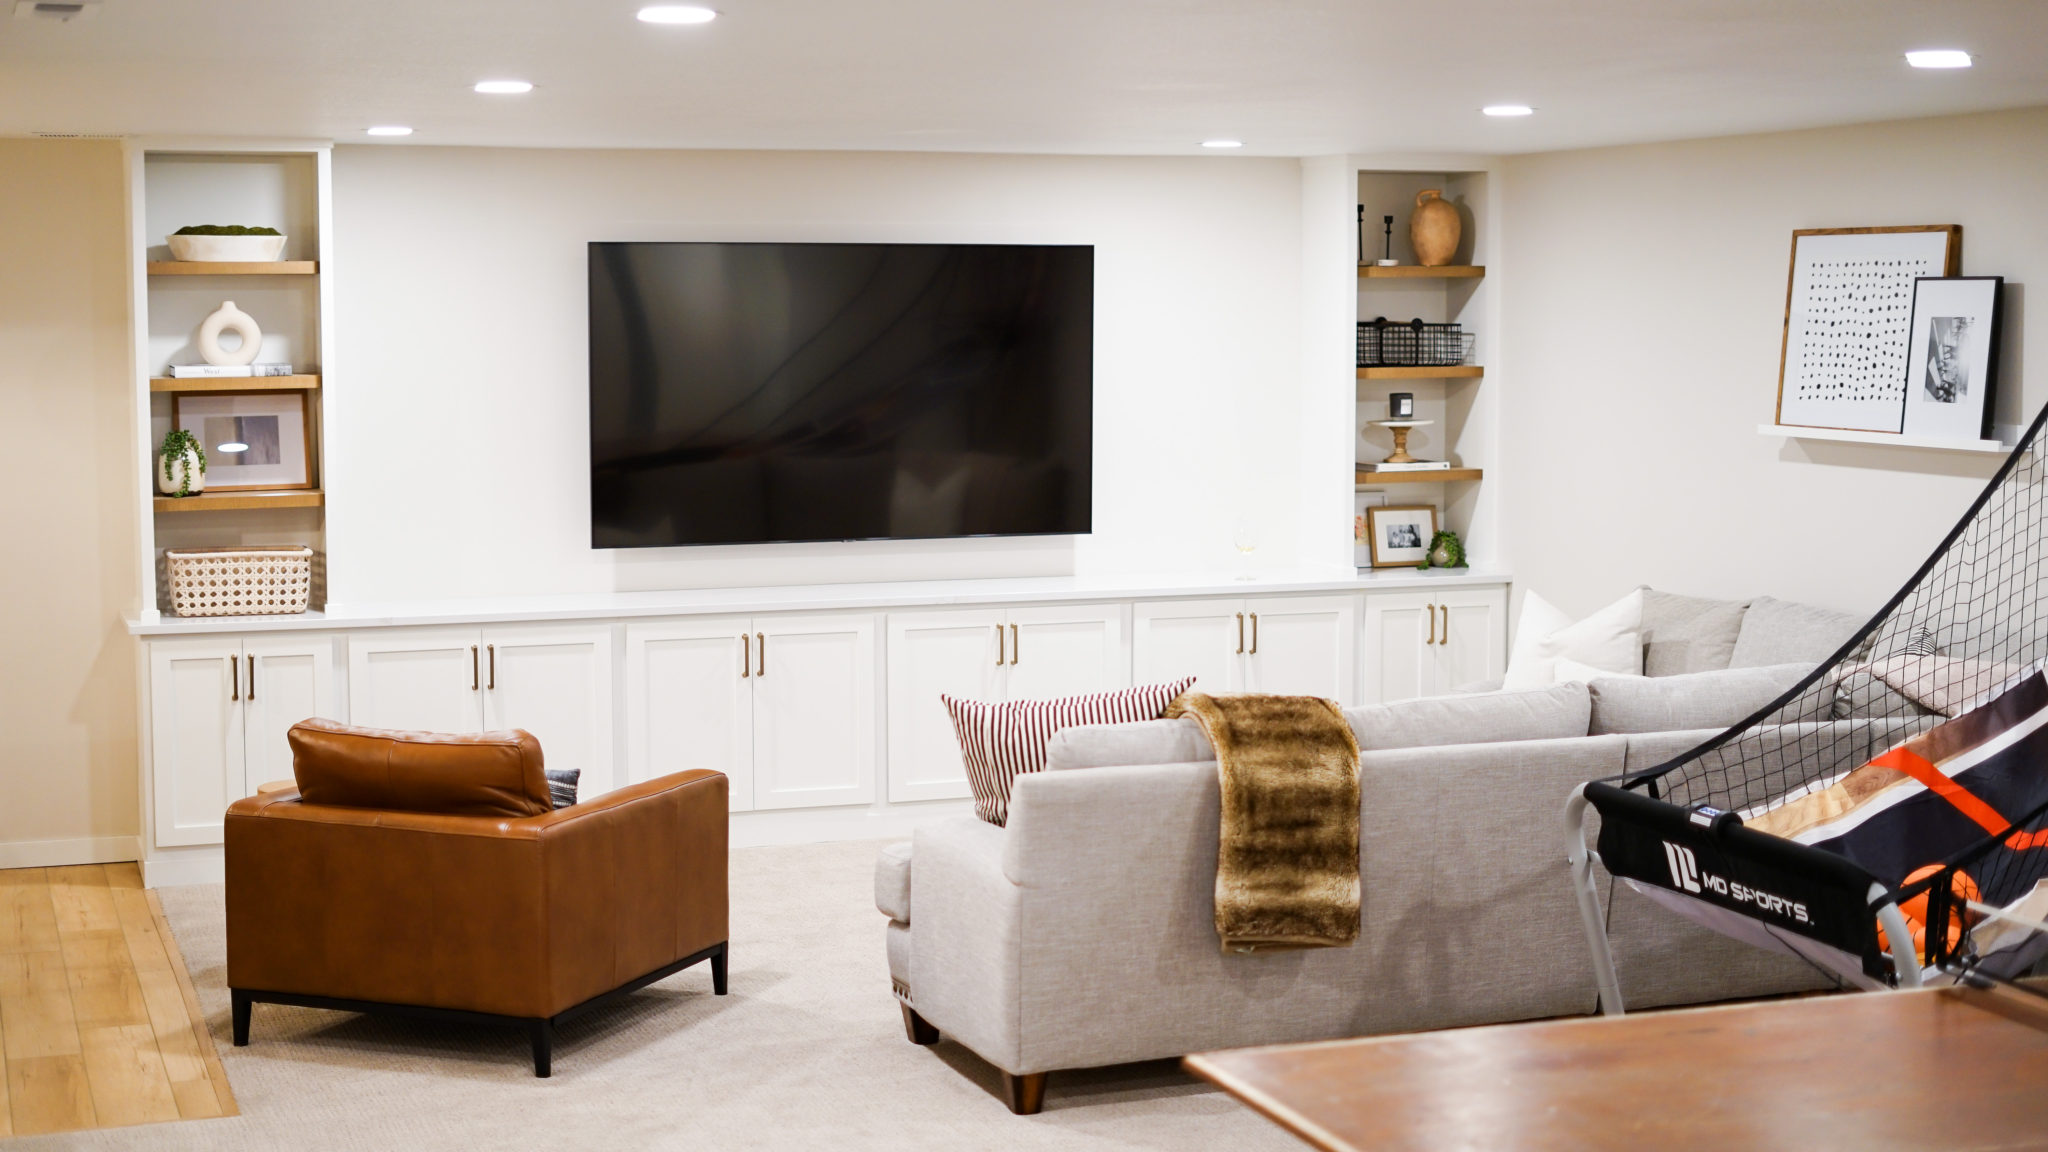 Modern Farmhouse Basement Design | Midwest In Style